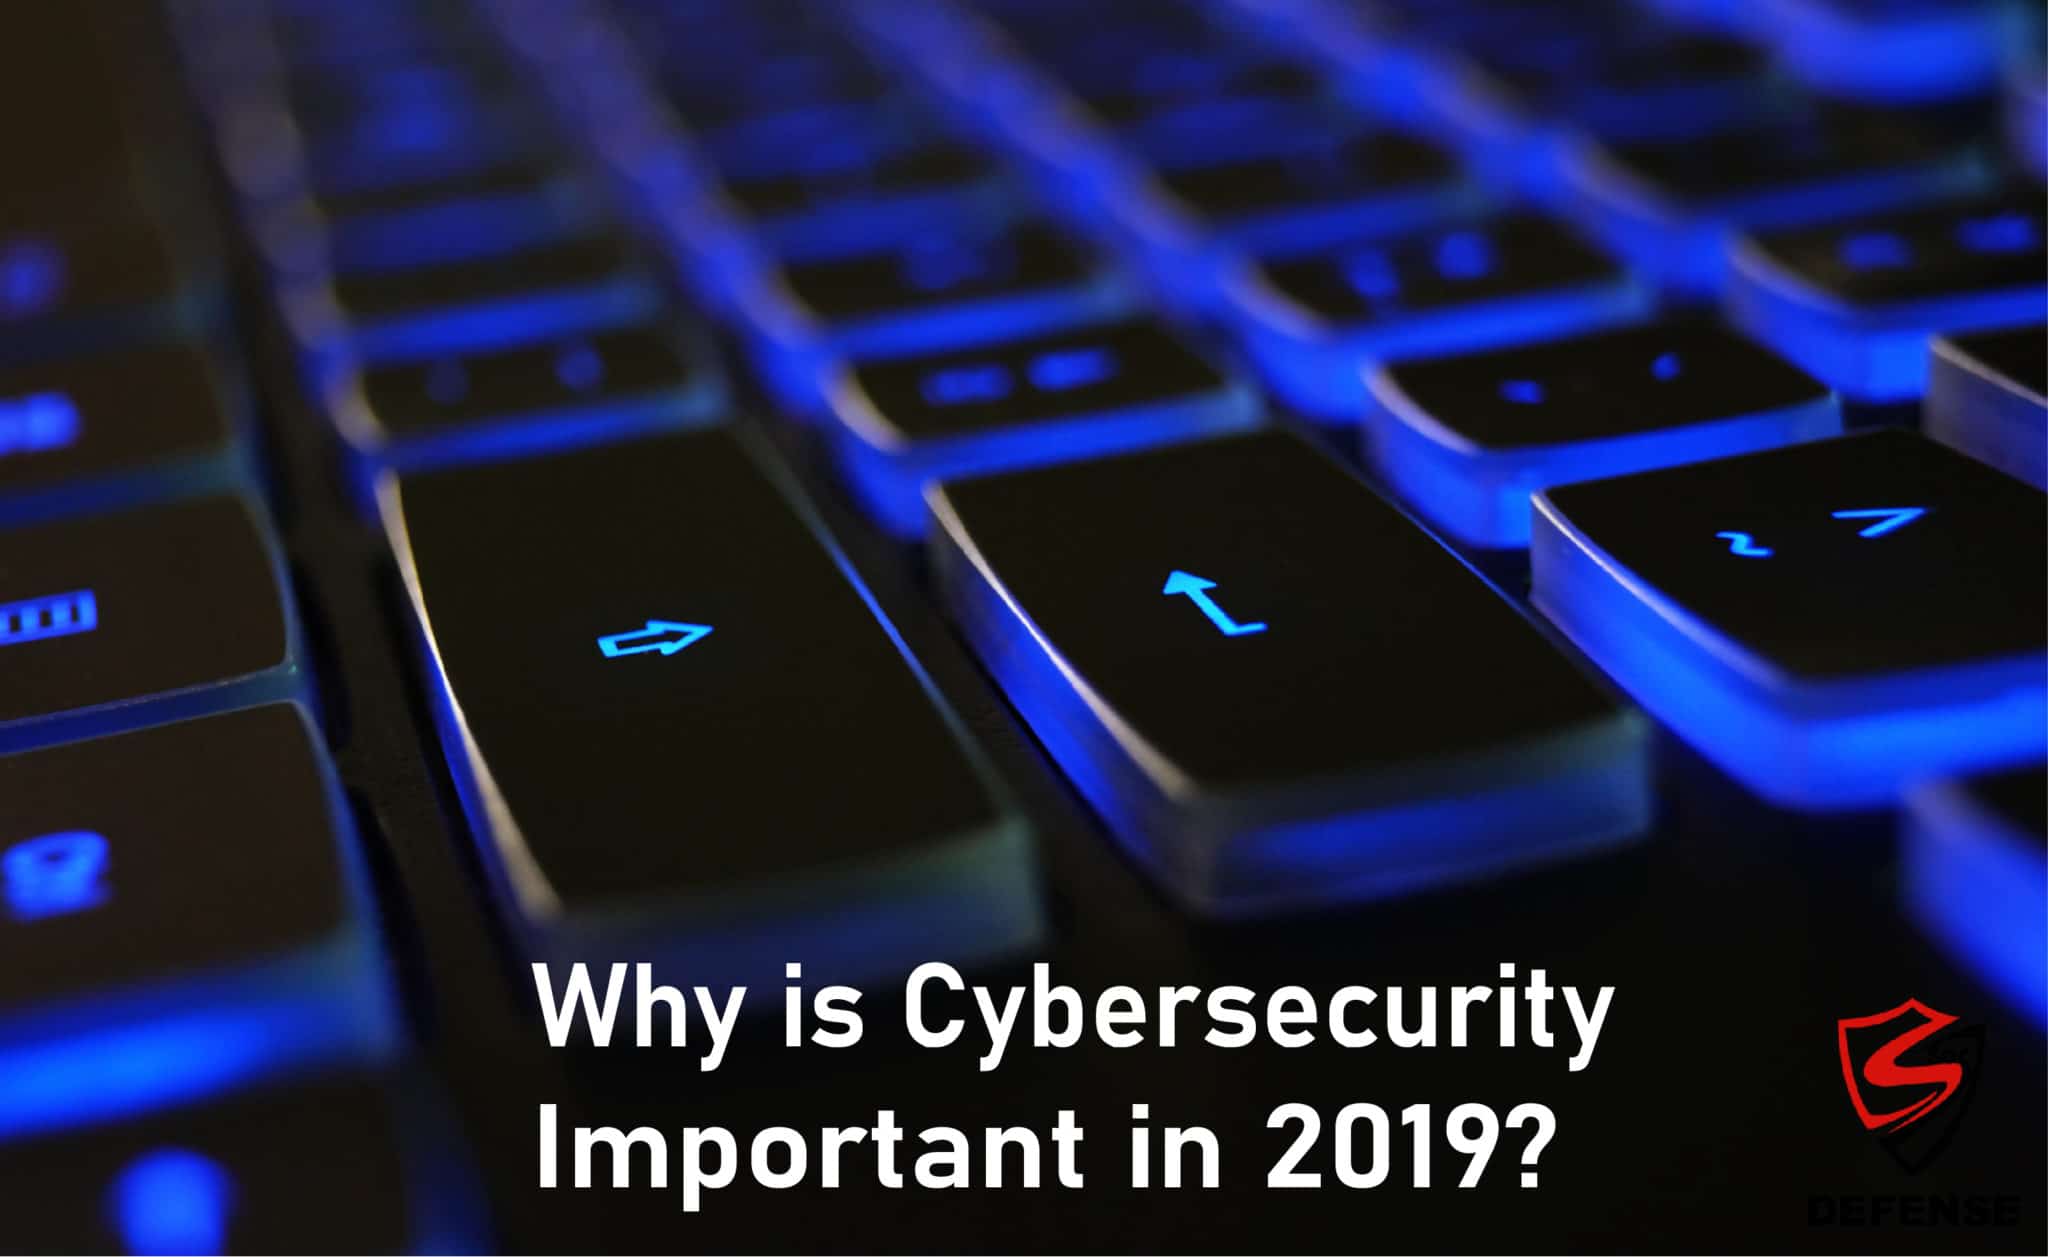 Why is Cybersecurity important in 2019?